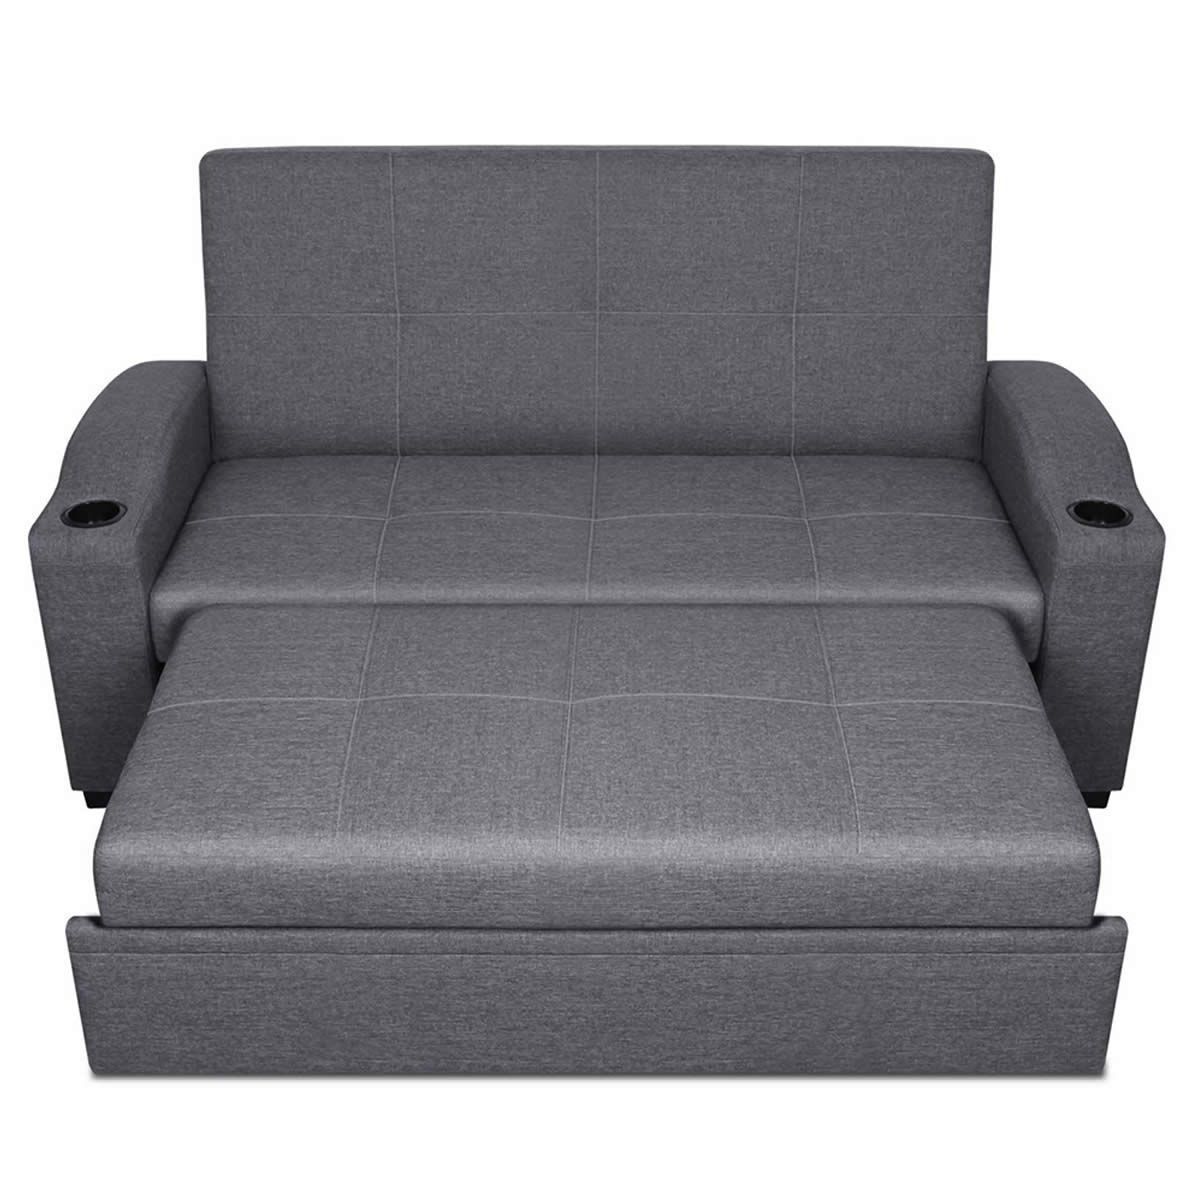 3 Seater Pull Out Sofa Bed Lounge Couch – Grey | Crazy Sales Throughout 3 In 1 Gray Pull Out Sleeper Sofas (View 16 of 20)